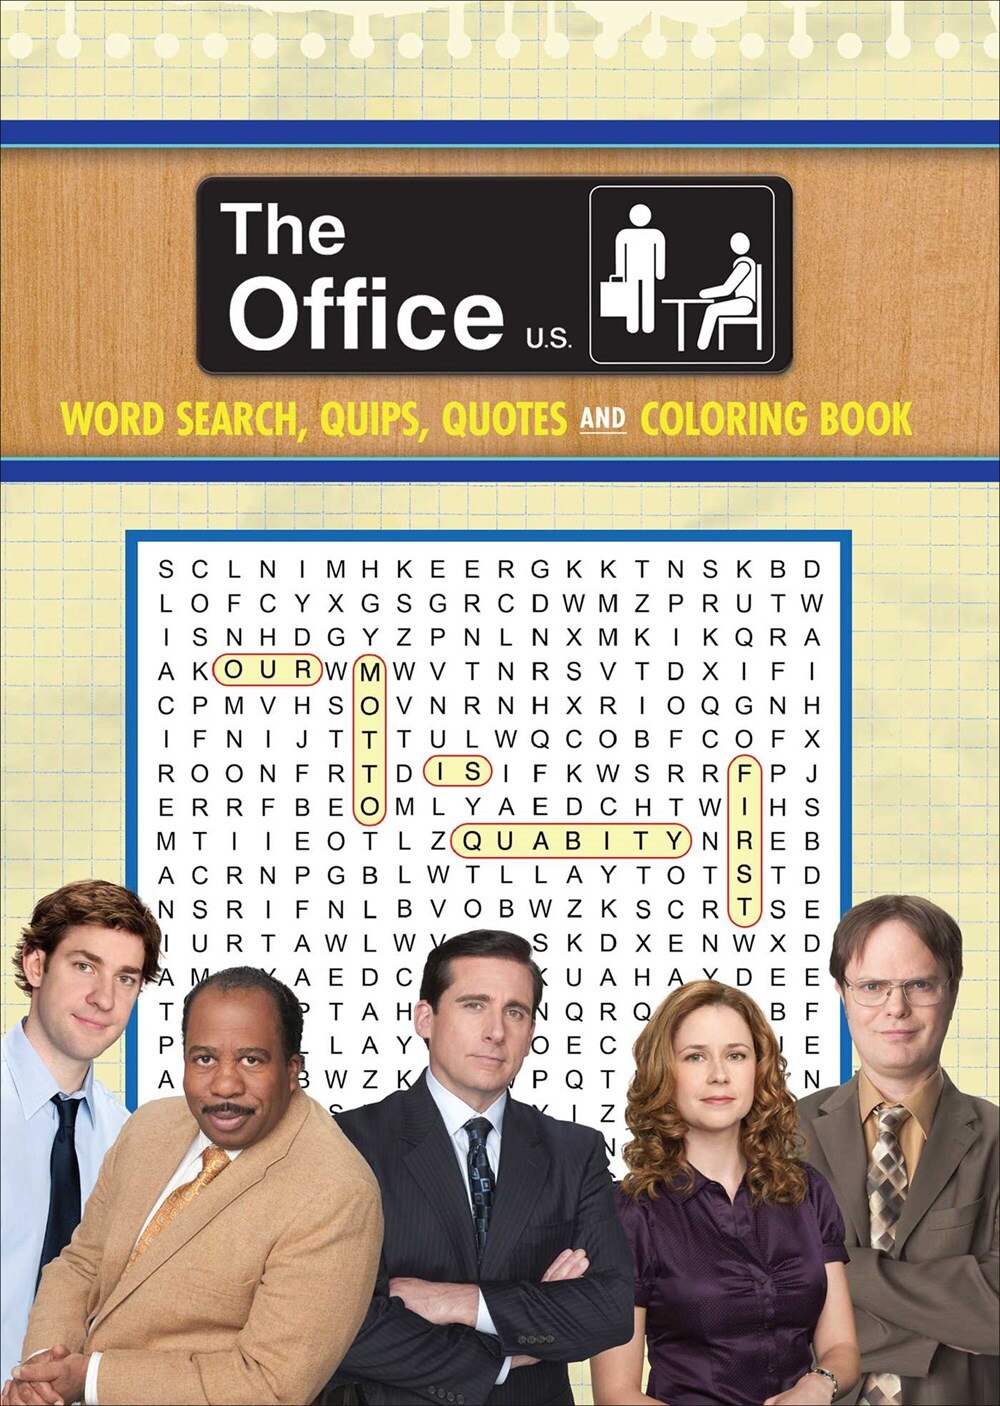 The Office Word Search  Quips  Quotes & Coloring Book